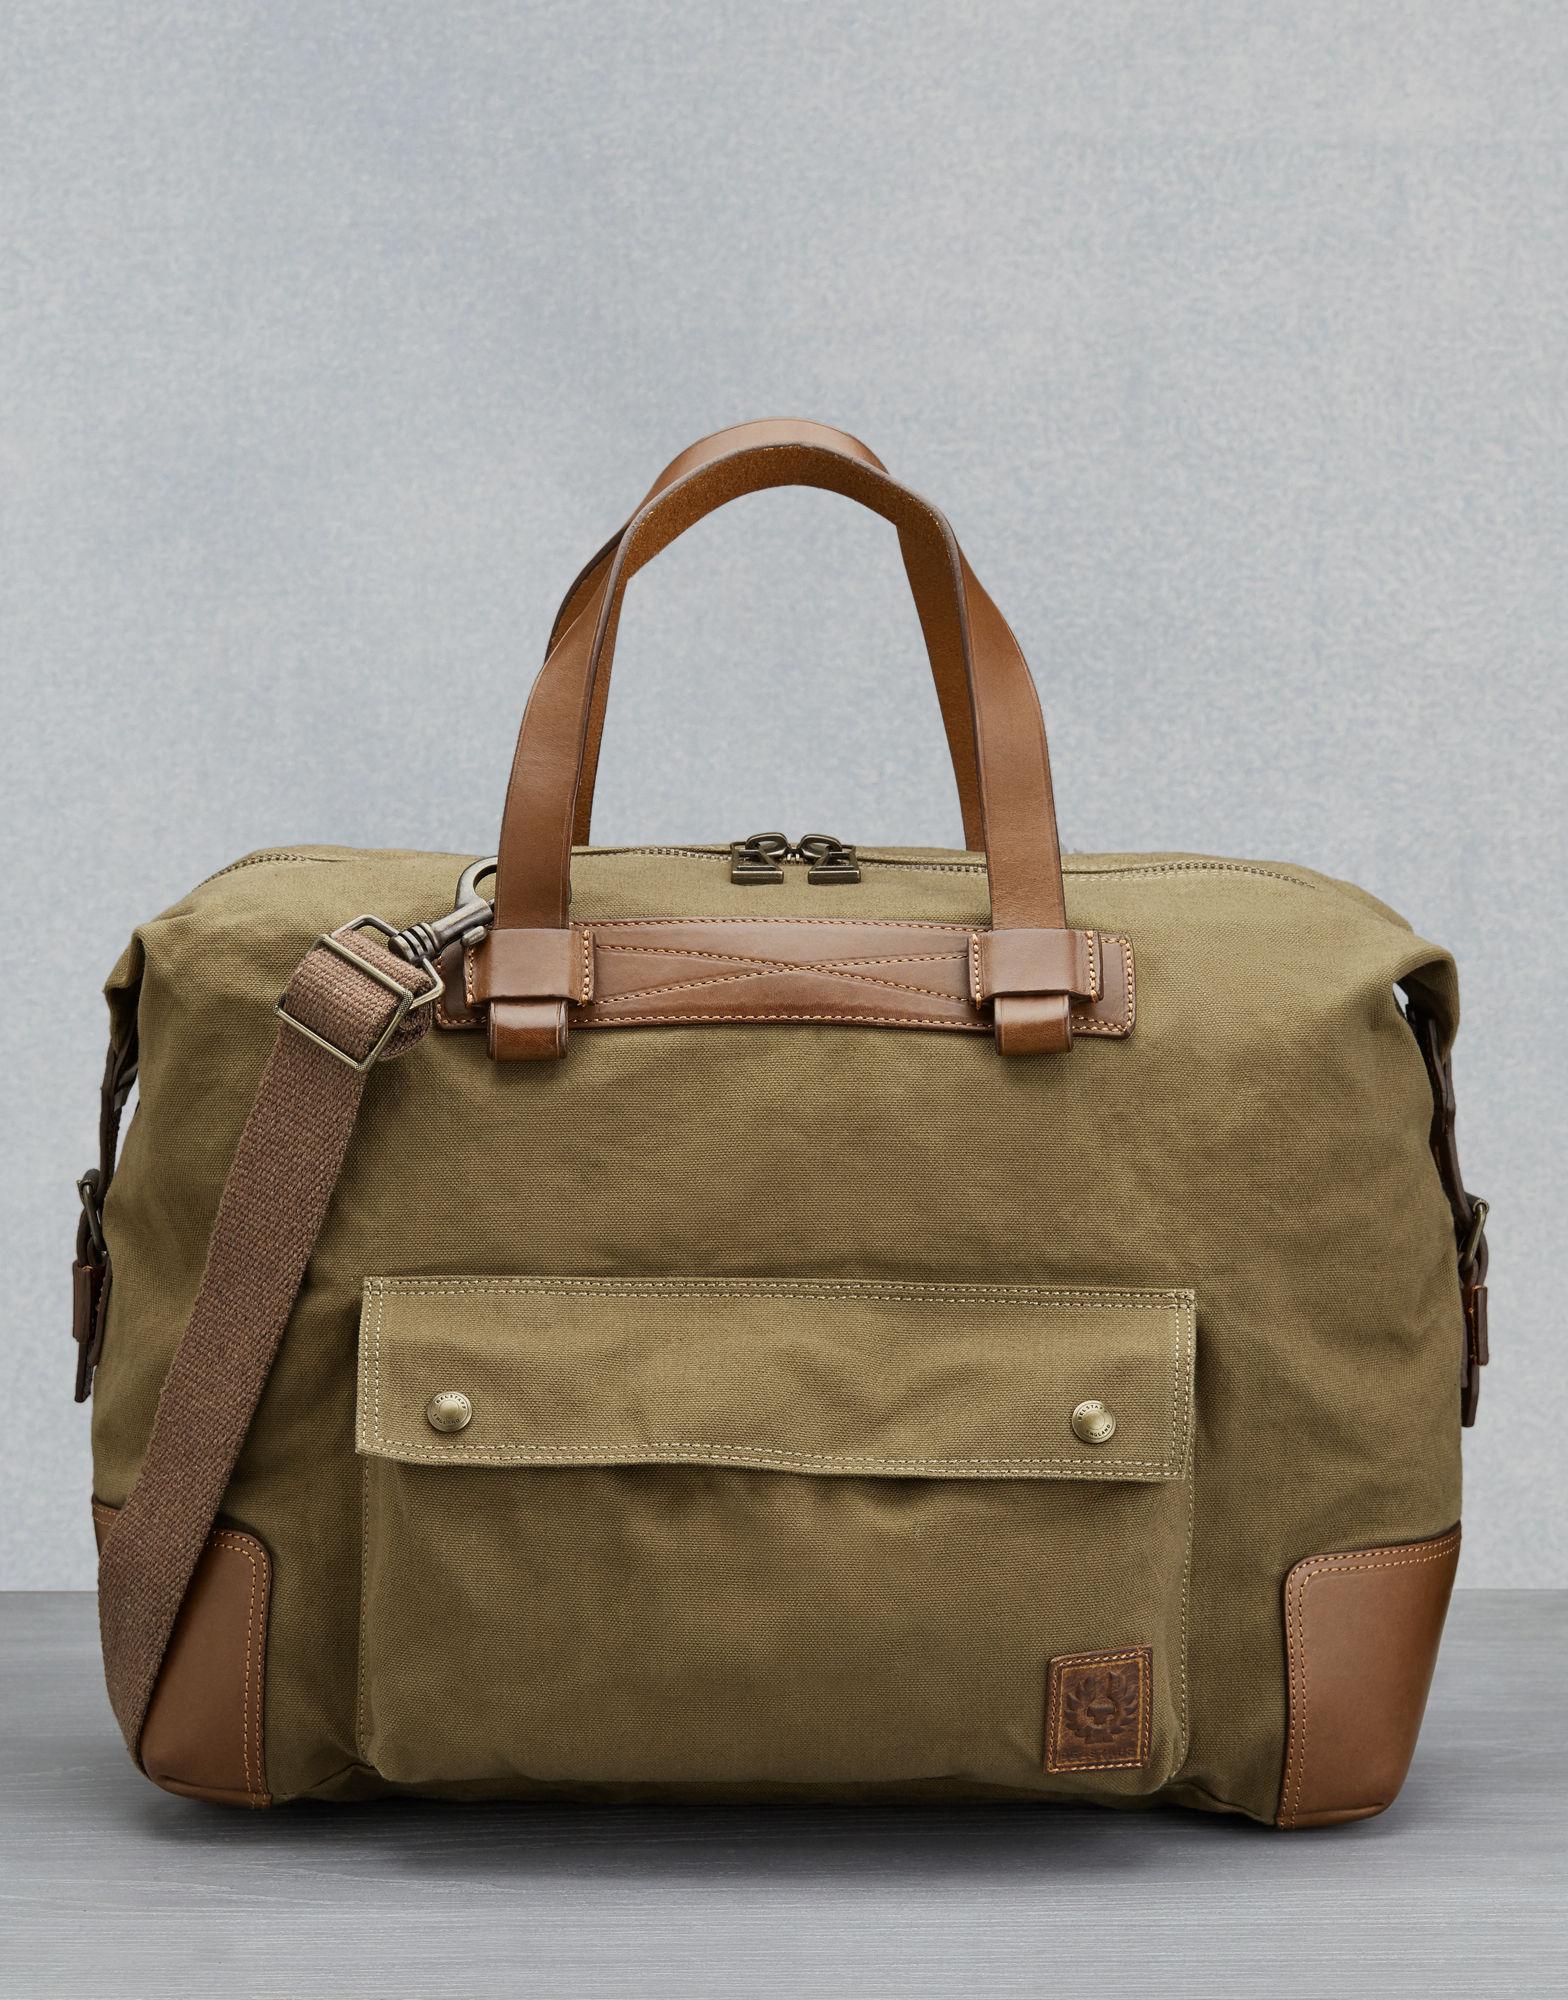 Belstaff Cotton Colonial Travel Bag in Brown for Men - Lyst